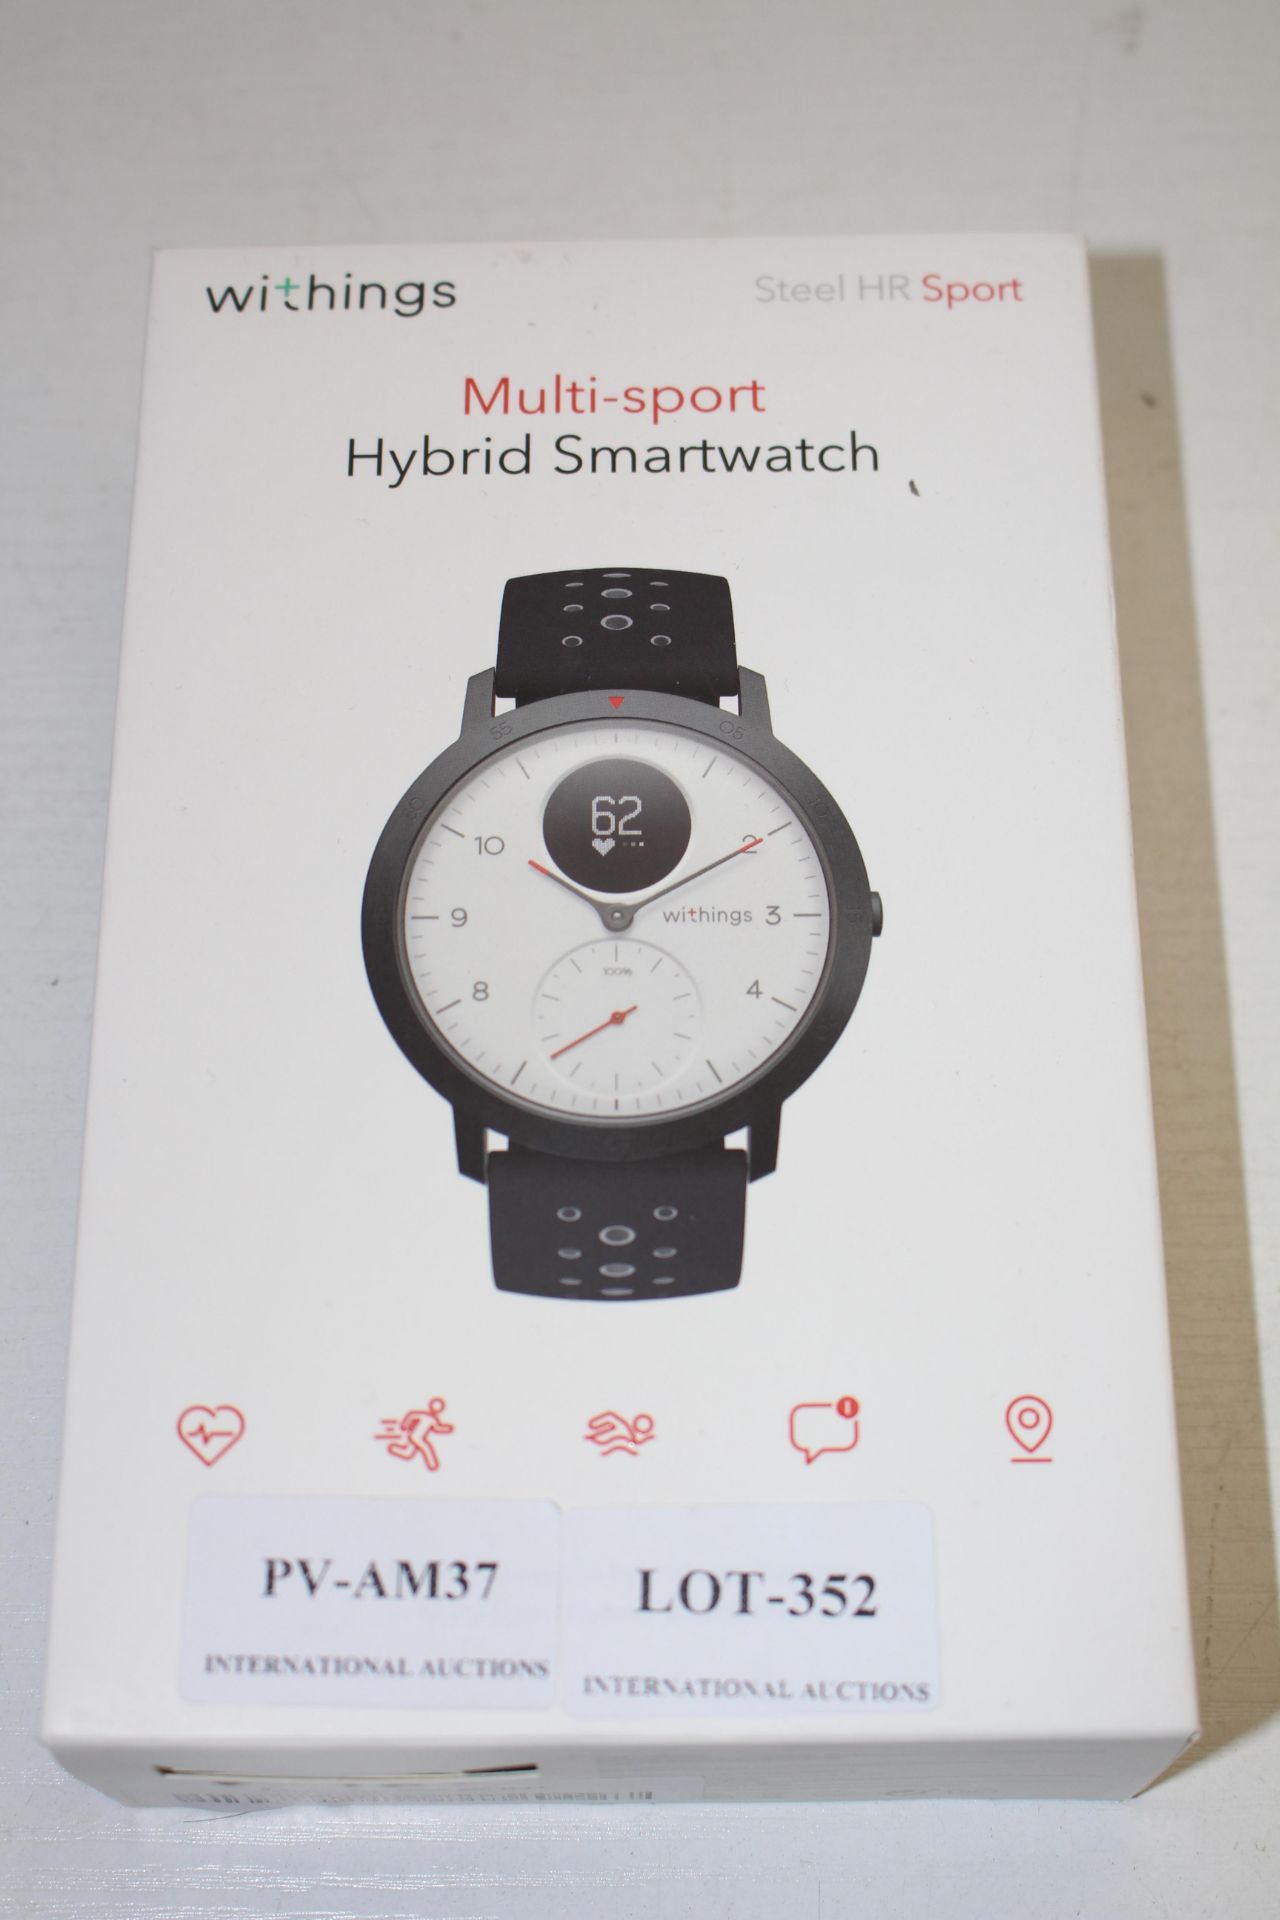 BOXED WITHINGS MULTI-SPORT HYBRID SMARTWATCH STEEL HR SPORT RRP £158.29Condition ReportAppraisal